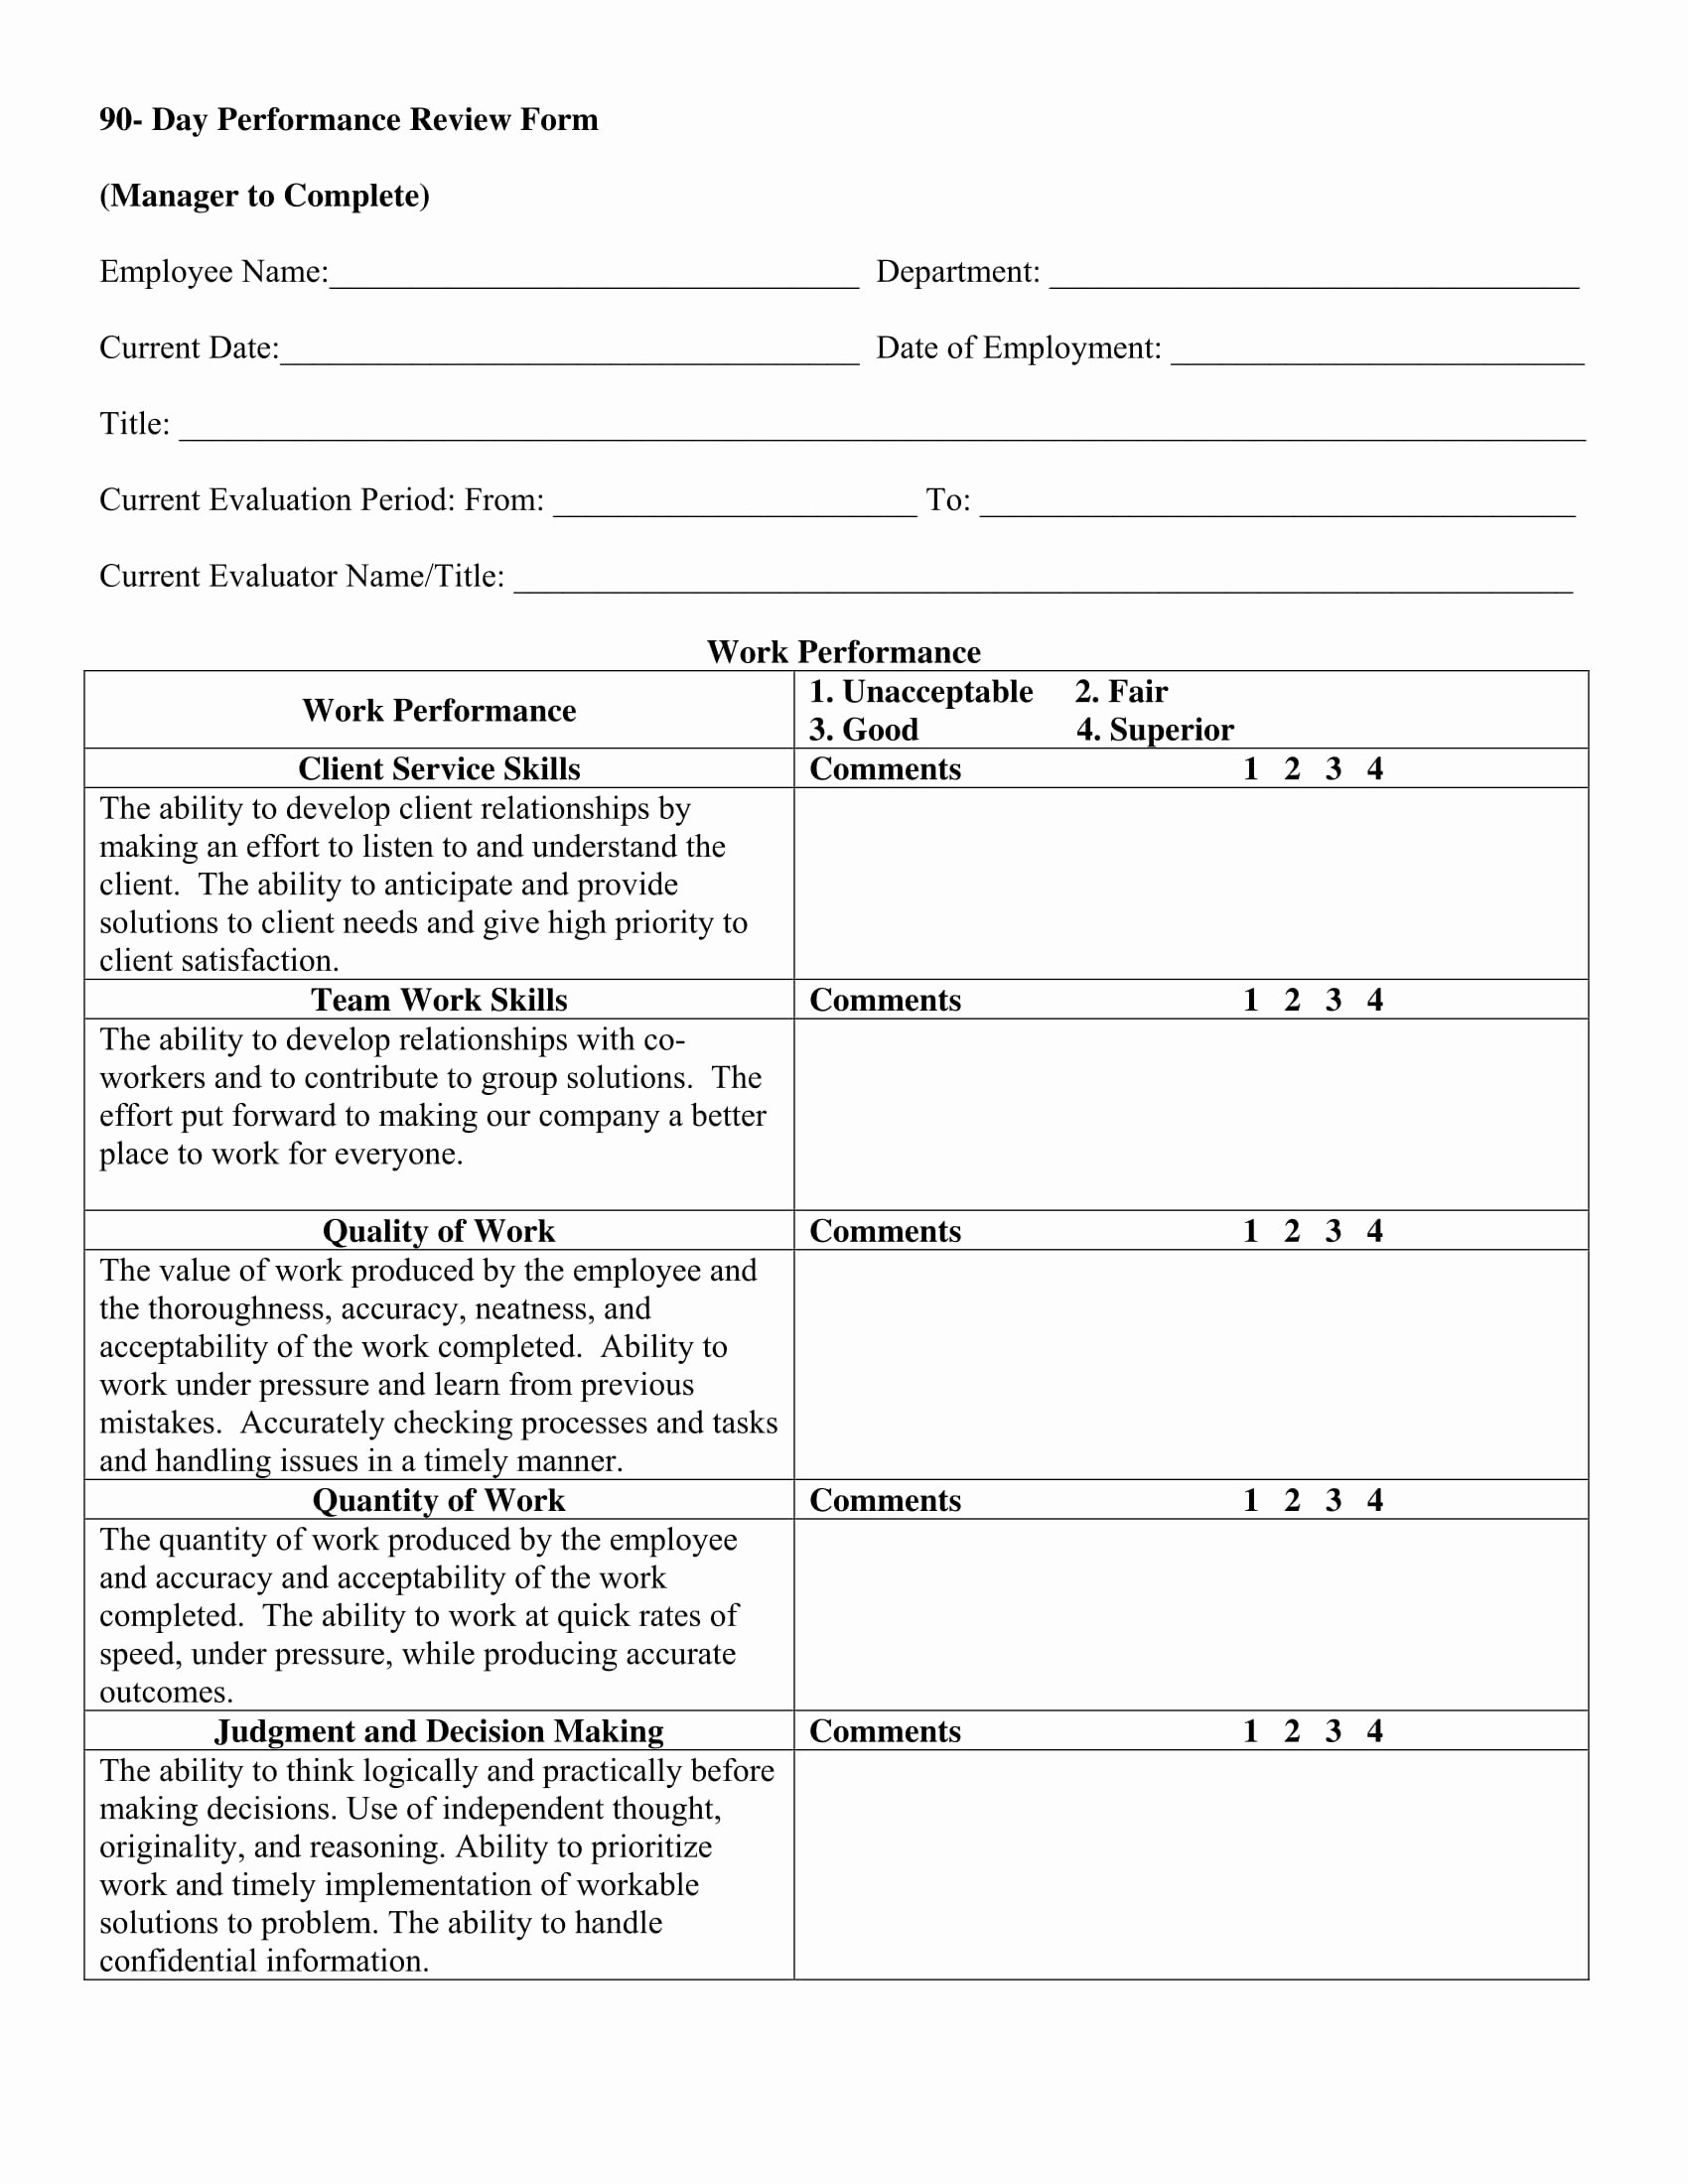 Employee Evaluation form Template Elegant 14 90 Day Review forms Free Word Pdf format Download